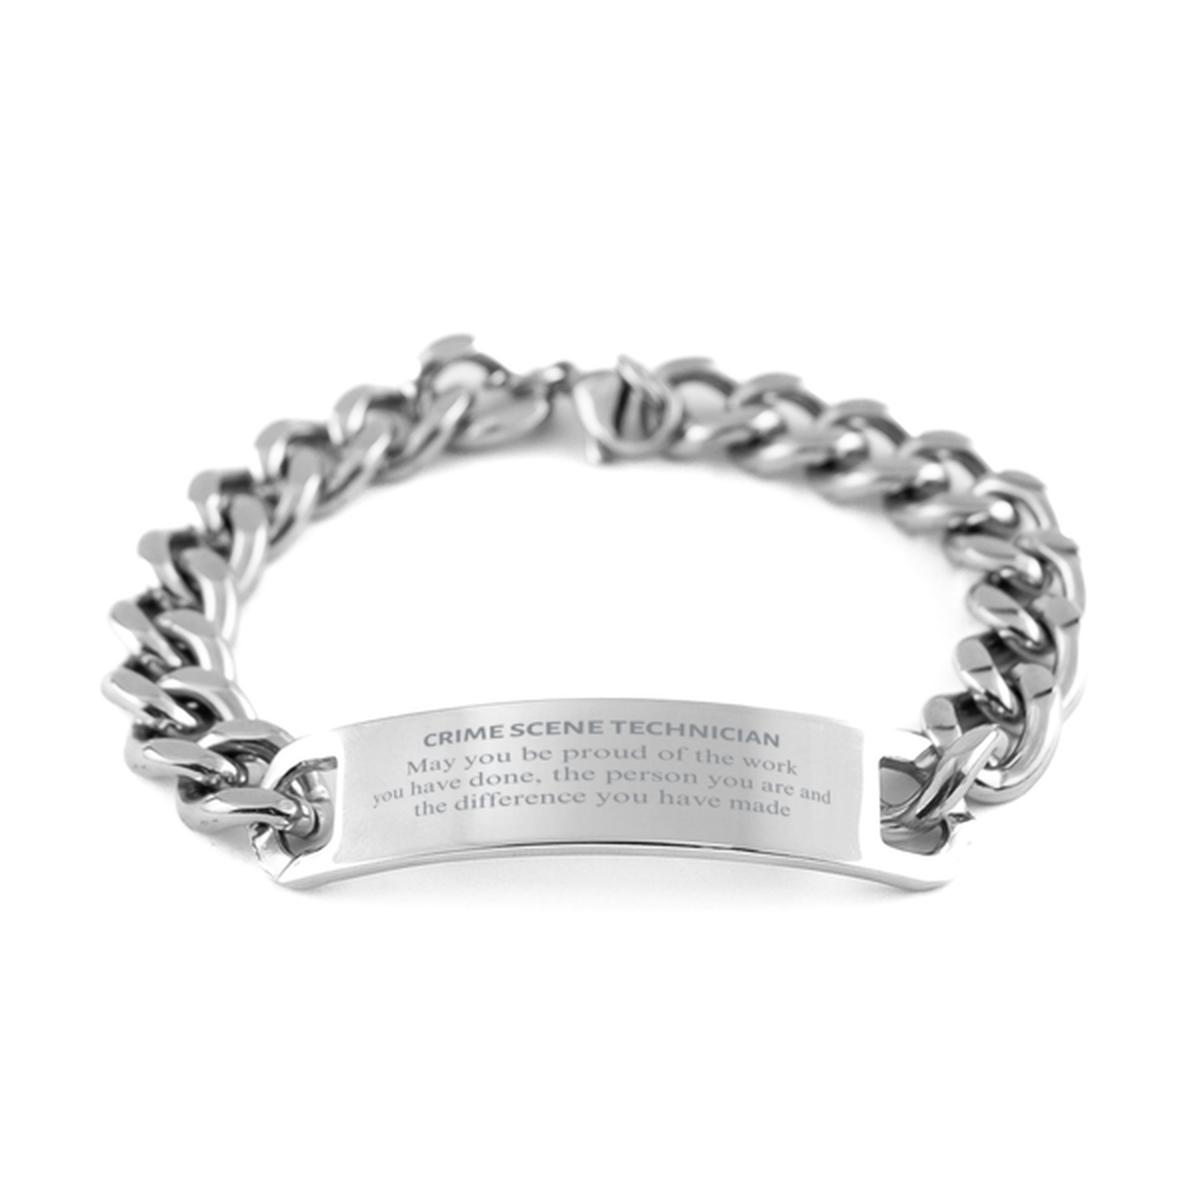 Crime Scene Technician May you be proud of the work you have done, Retirement Crime Scene Technician Cuban Chain Stainless Steel Bracelet for Colleague Appreciation Gifts Amazing for Crime Scene Technician